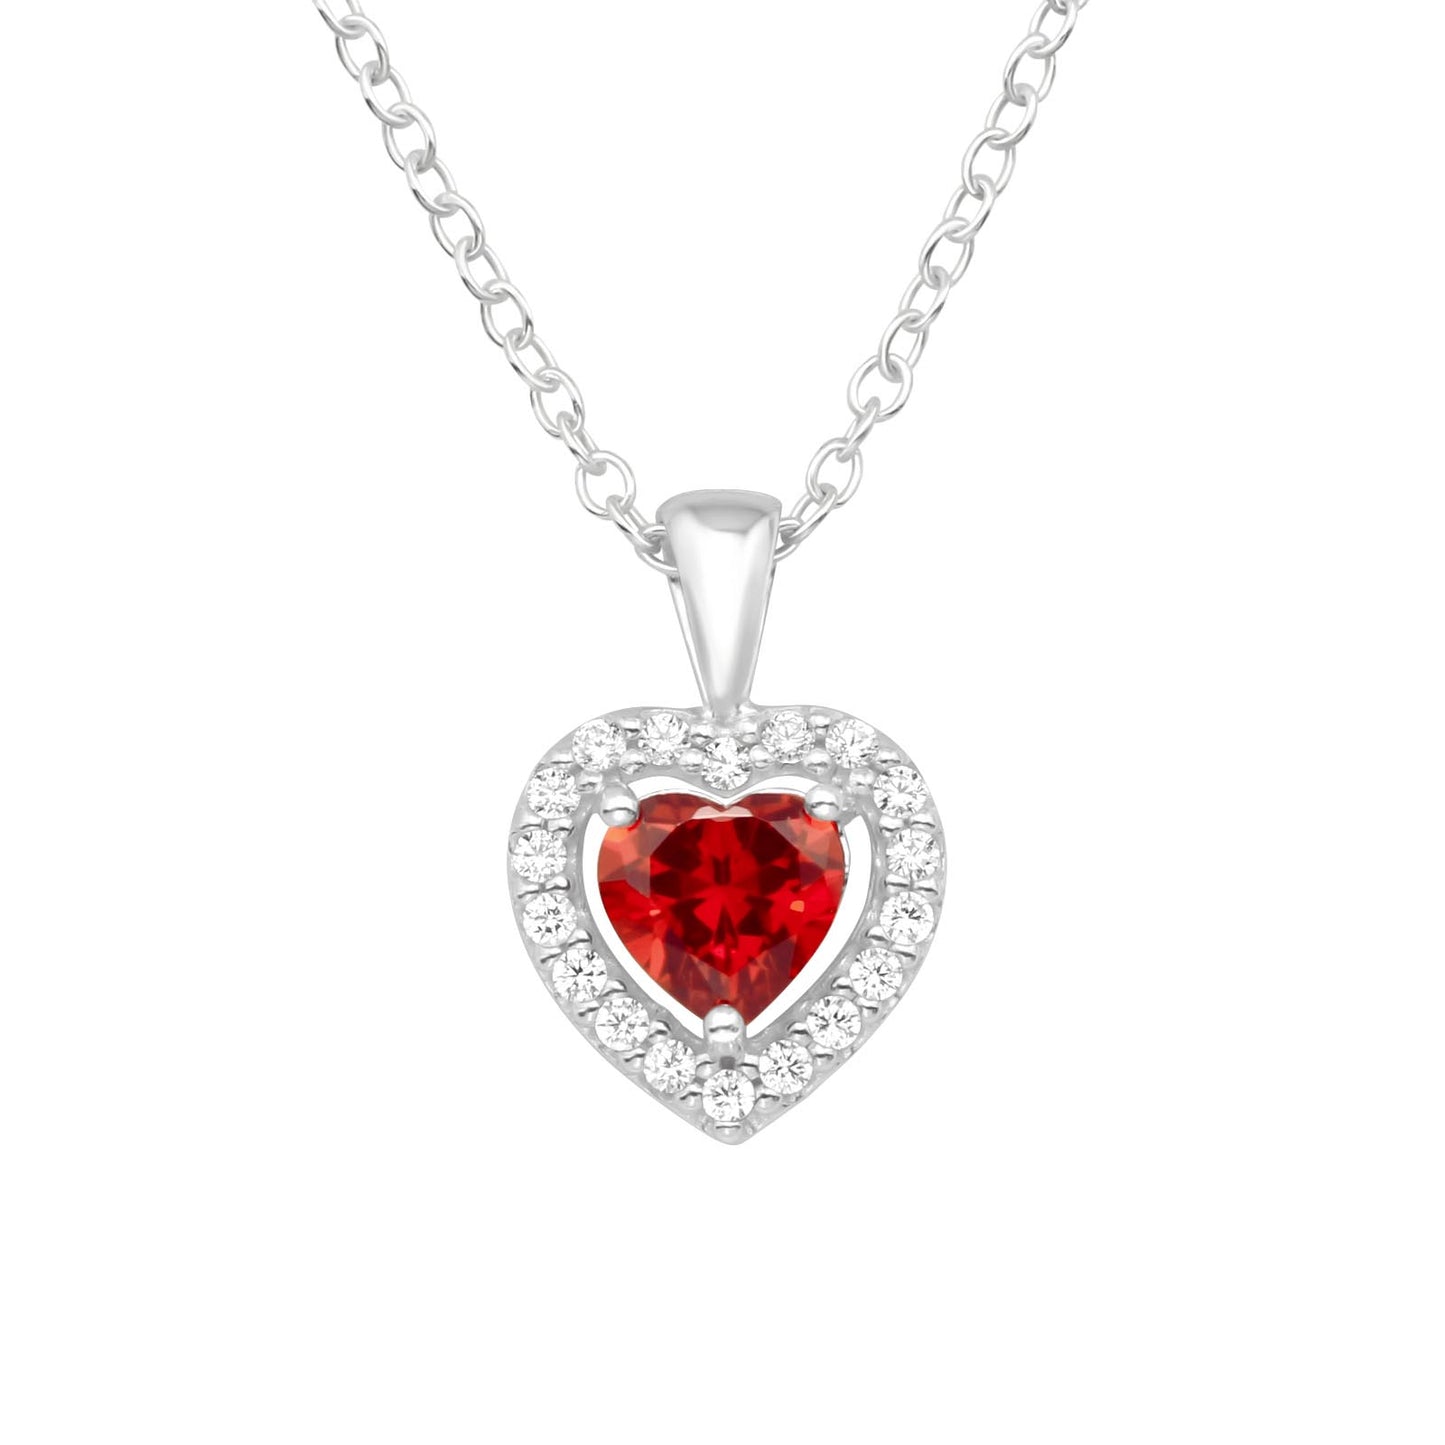 Red Heart Cubic Zirconia Love Necklace - Sterling Silver